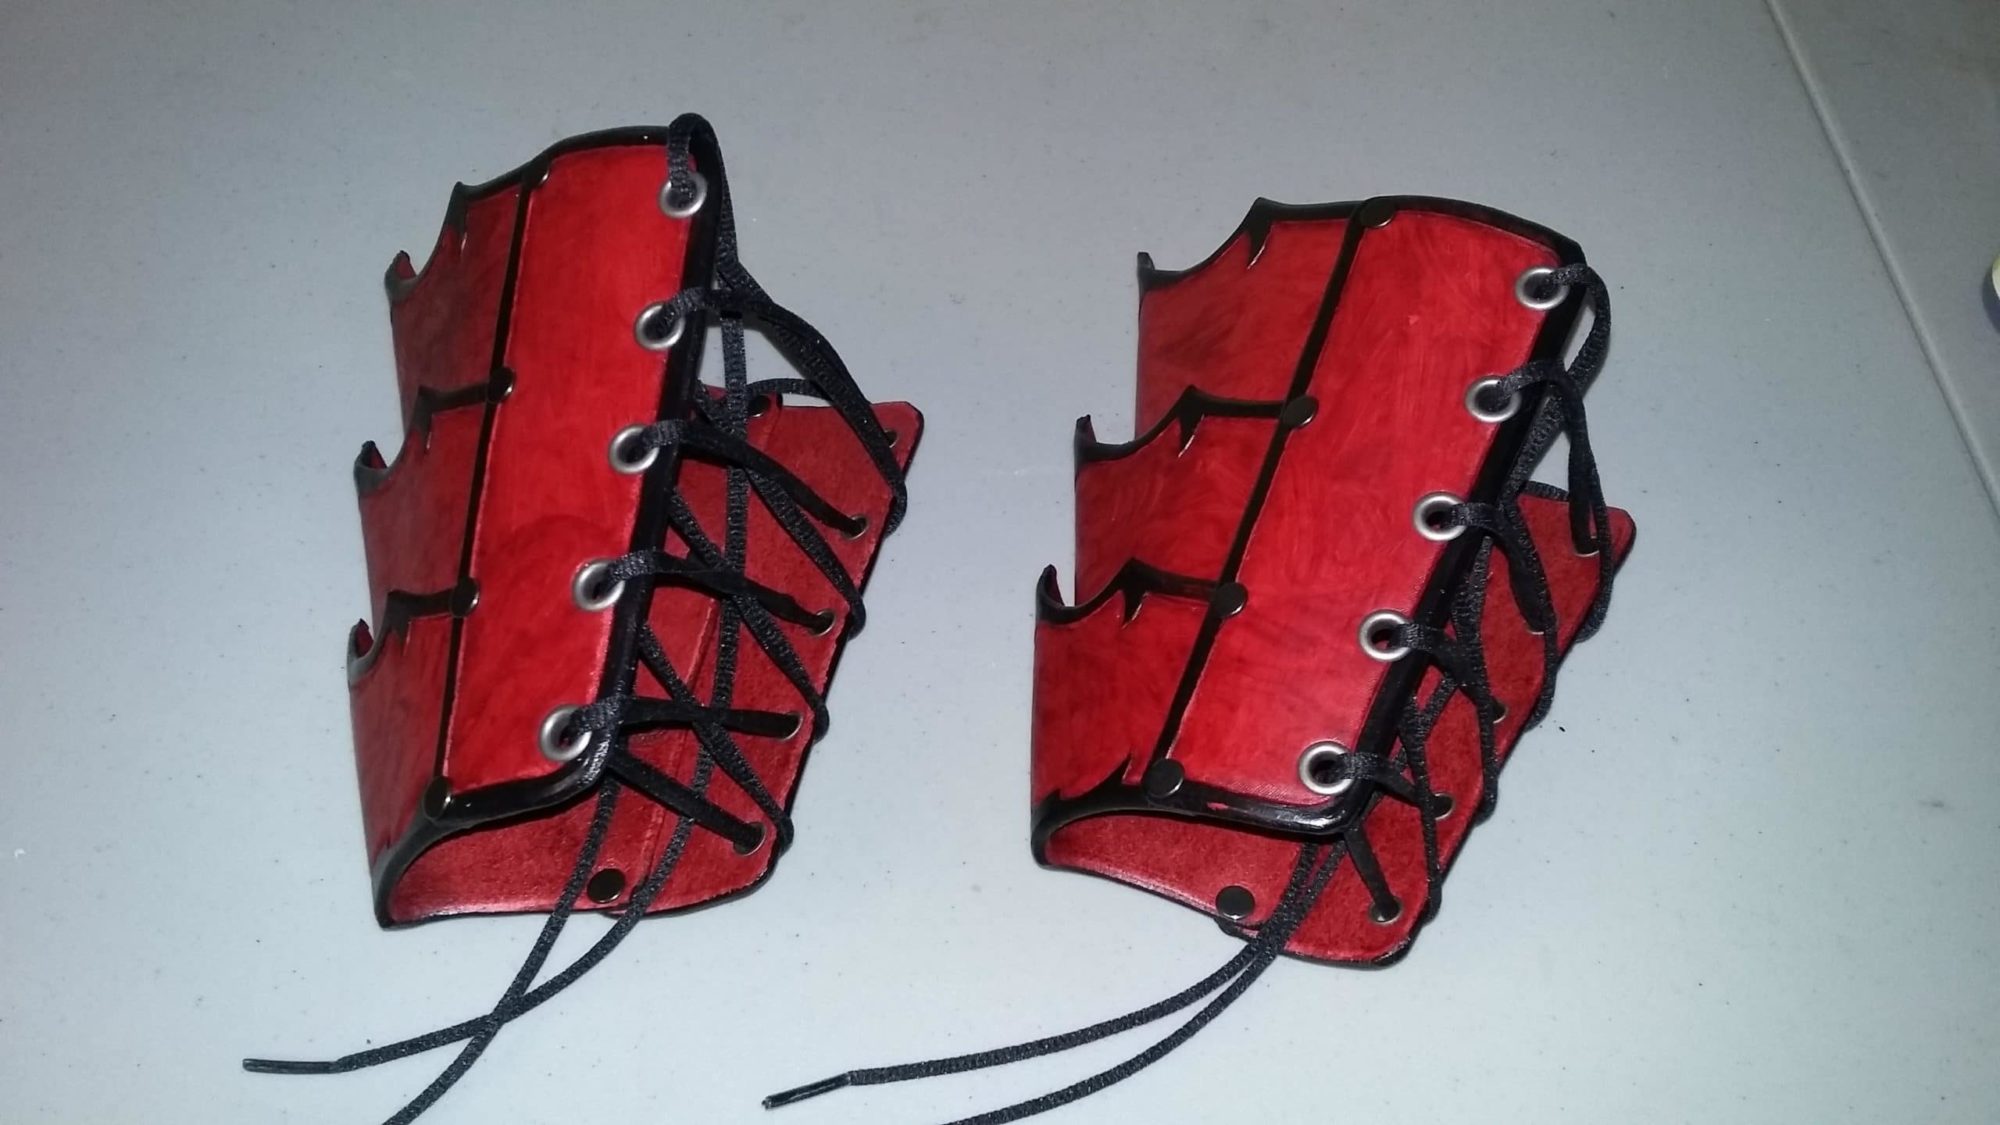 Buy Leather Armor Patterns & Templates | Expert Designs